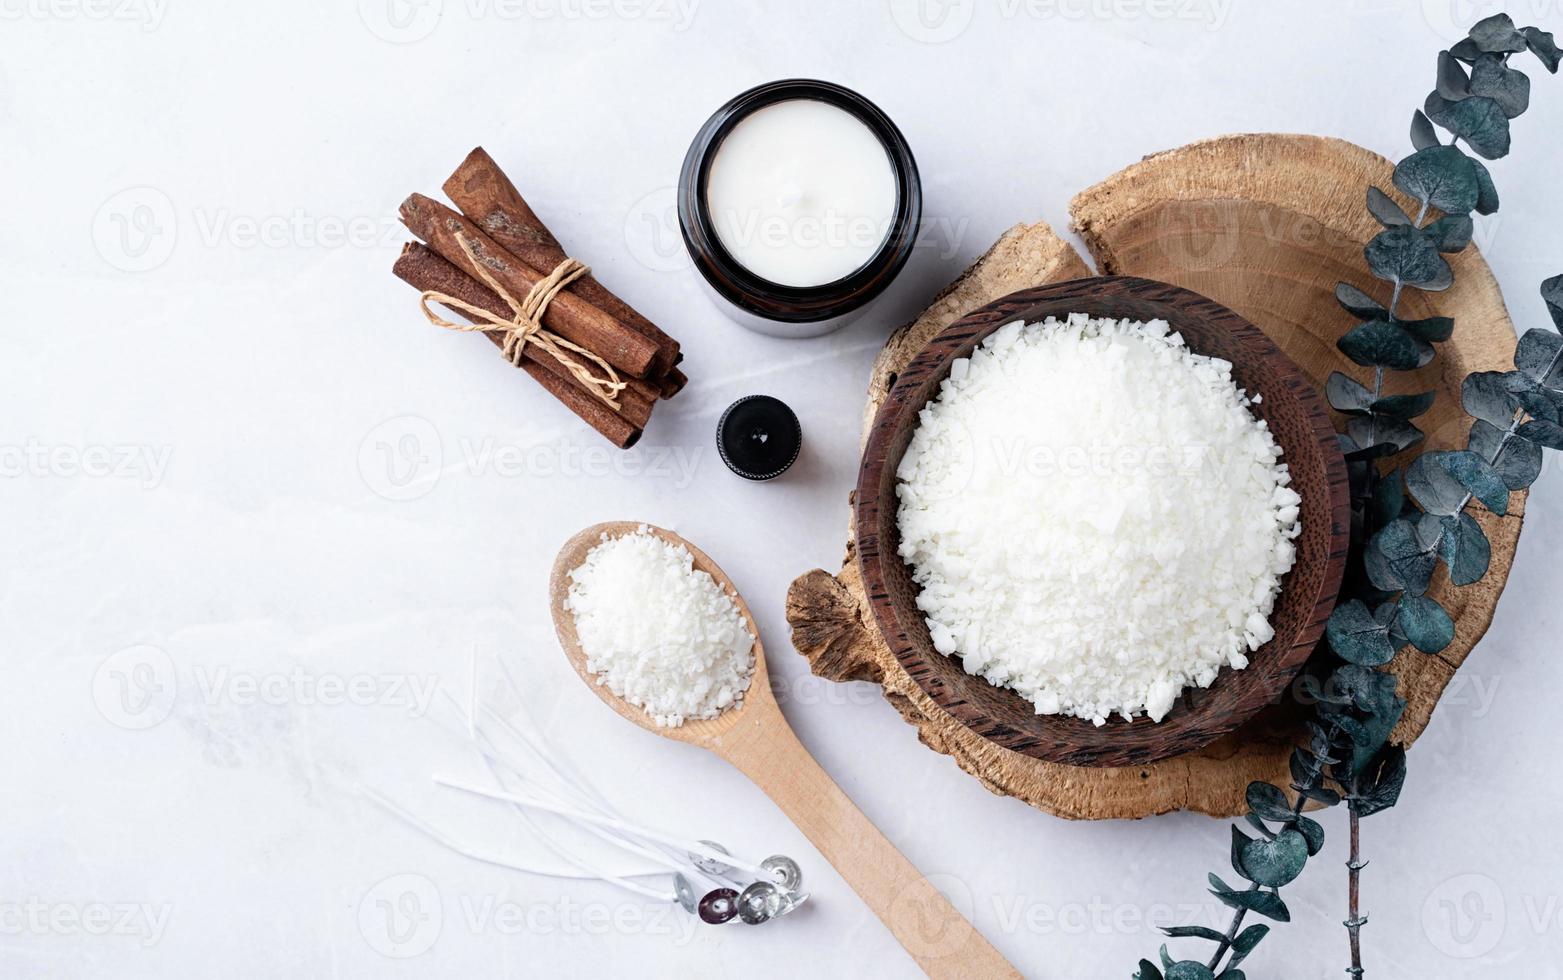 Ingredients For Candle Making Soy Wax Flakes Candles Cinnamon Wicks And  Wooden Spoons On Wooden Background Stock Photo - Download Image Now - iStock